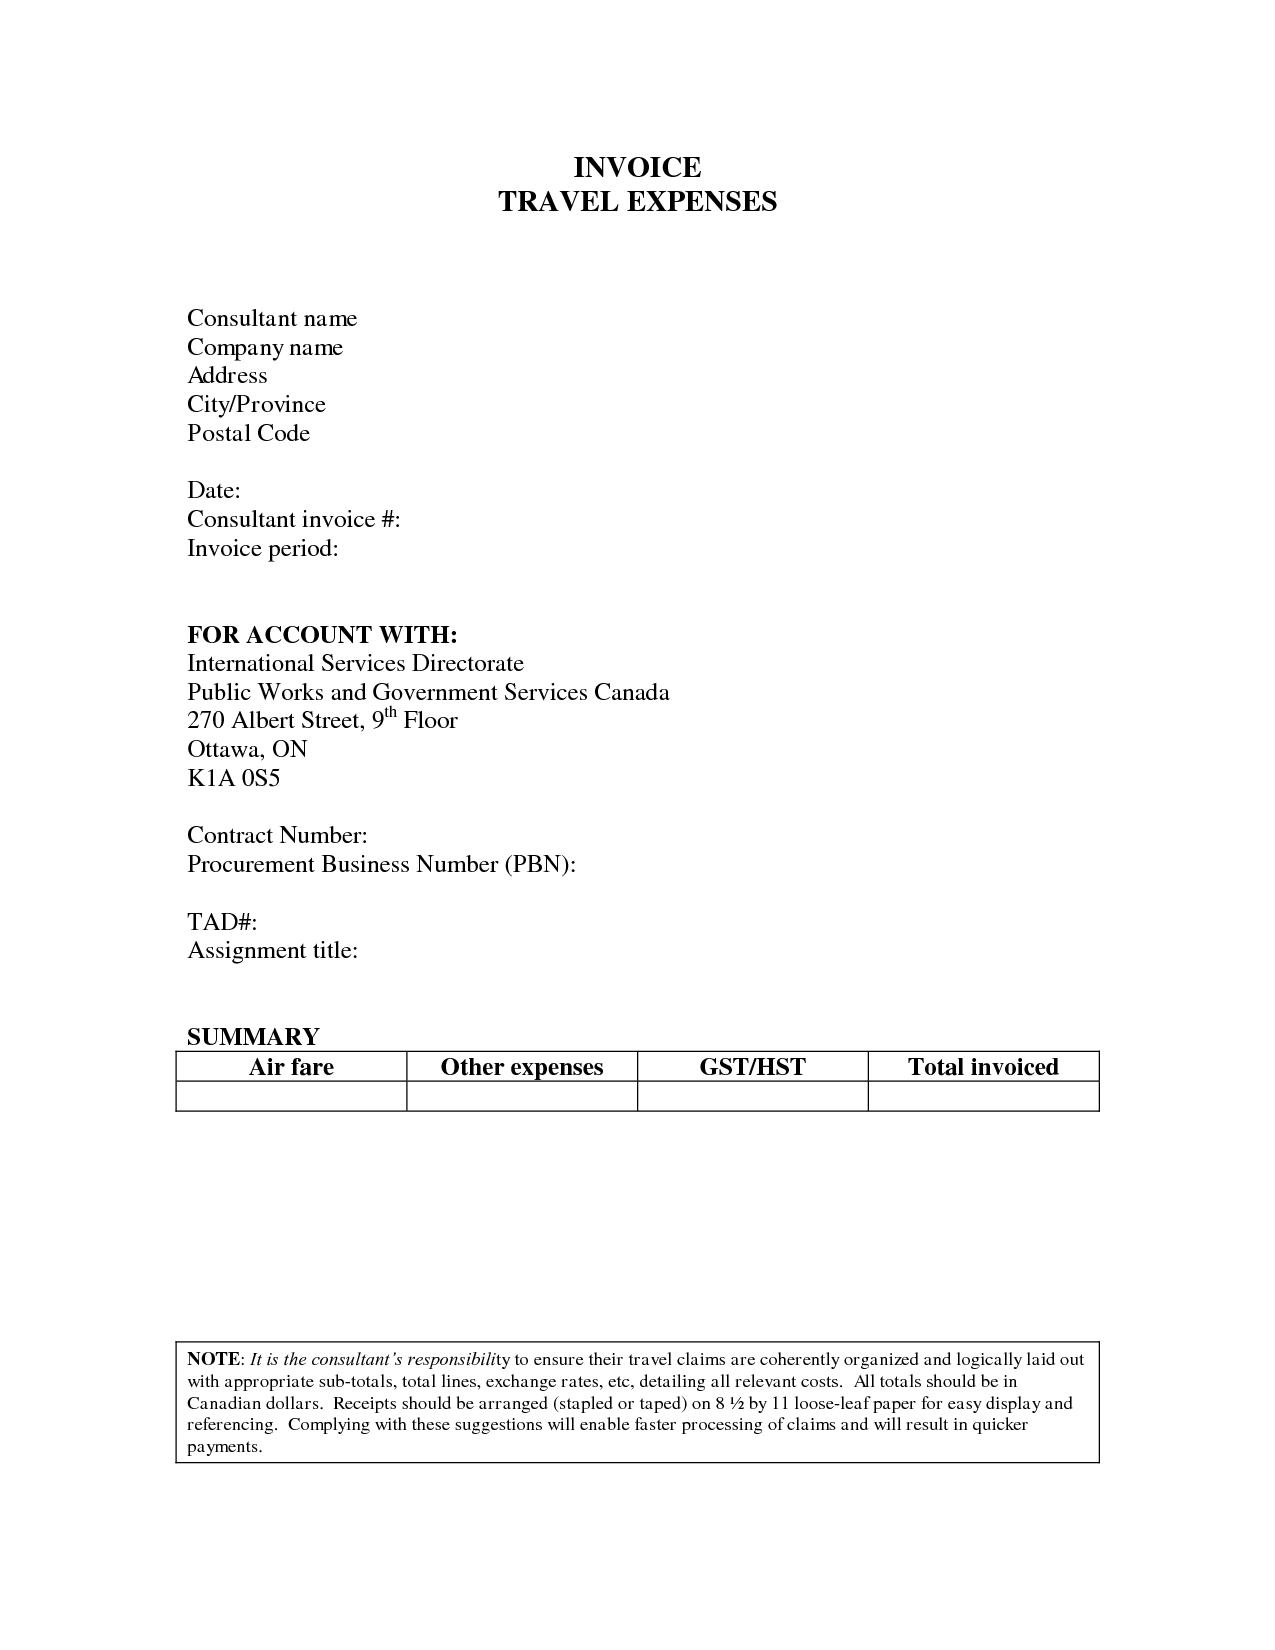 paper source website pro4t expenses invoice template